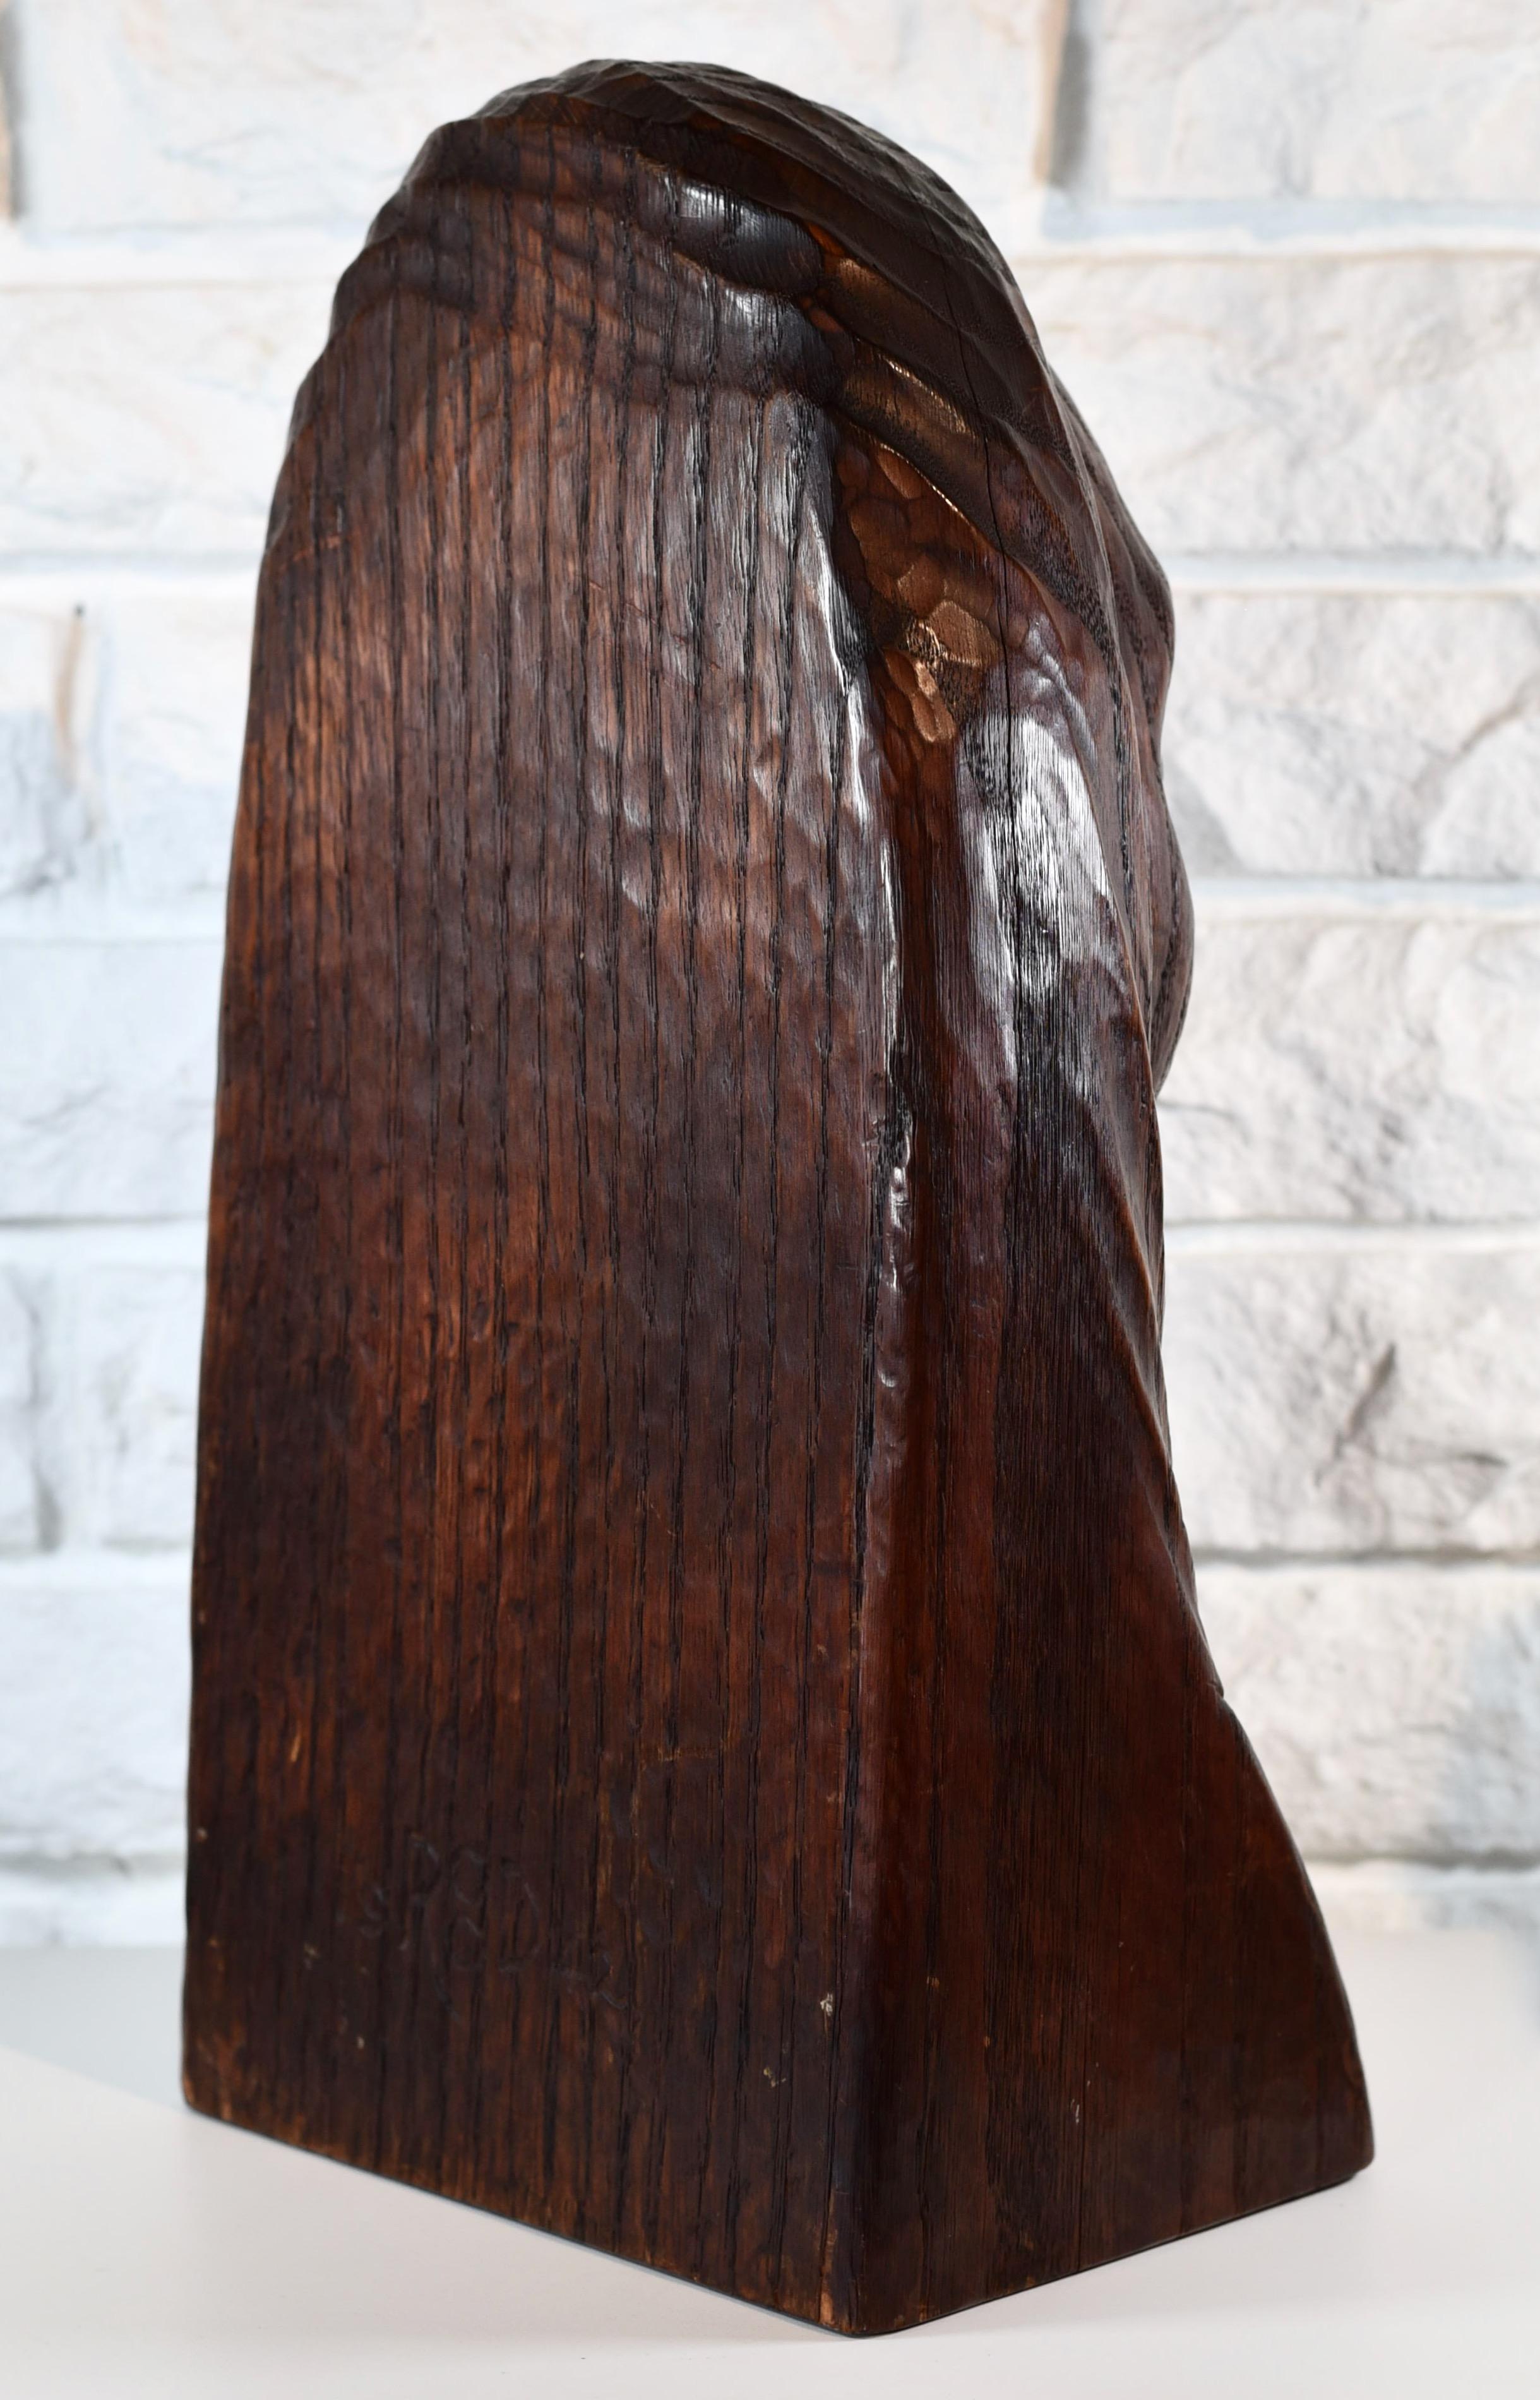 Carved John Rood (1902-1974) Wood Sculpture Signed 1942 In Good Condition For Sale In Sarasota, FL